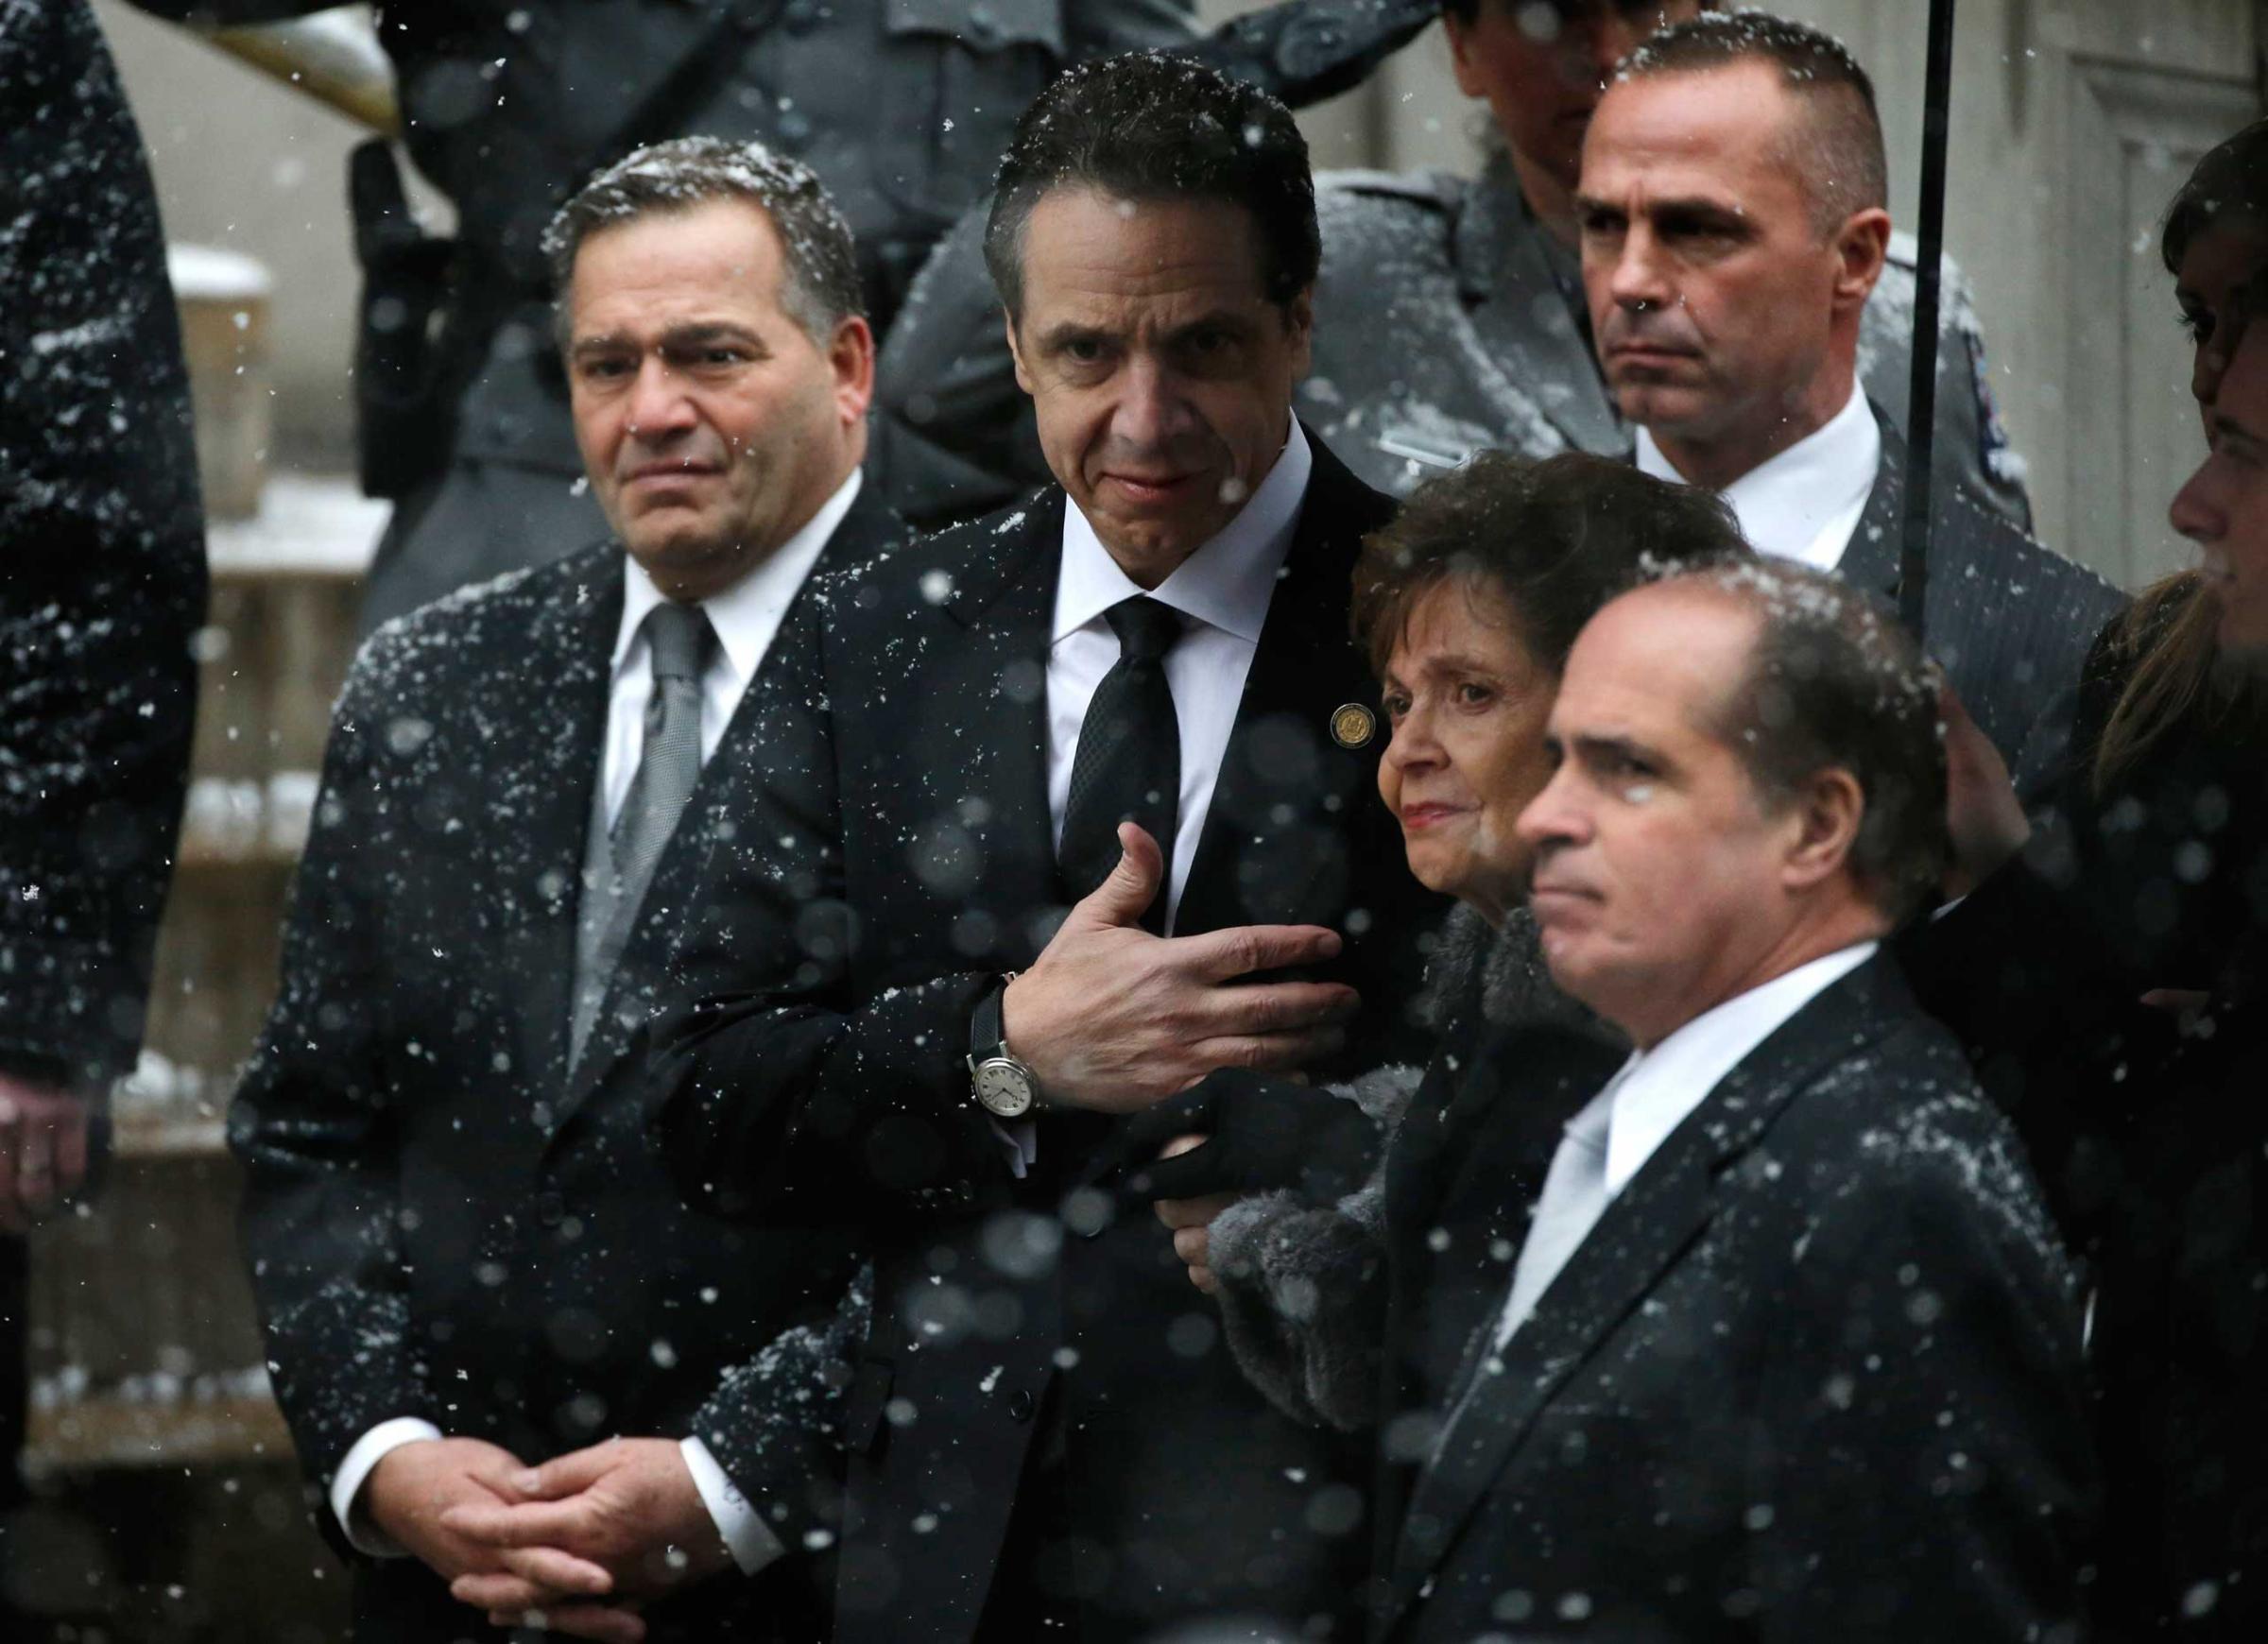 New York Governor Andrew Cuomo watches the casket of his late father, former New York Governor Mario Cuomo, being carried into St. Ignatius Loyola Church for funeral service in New York